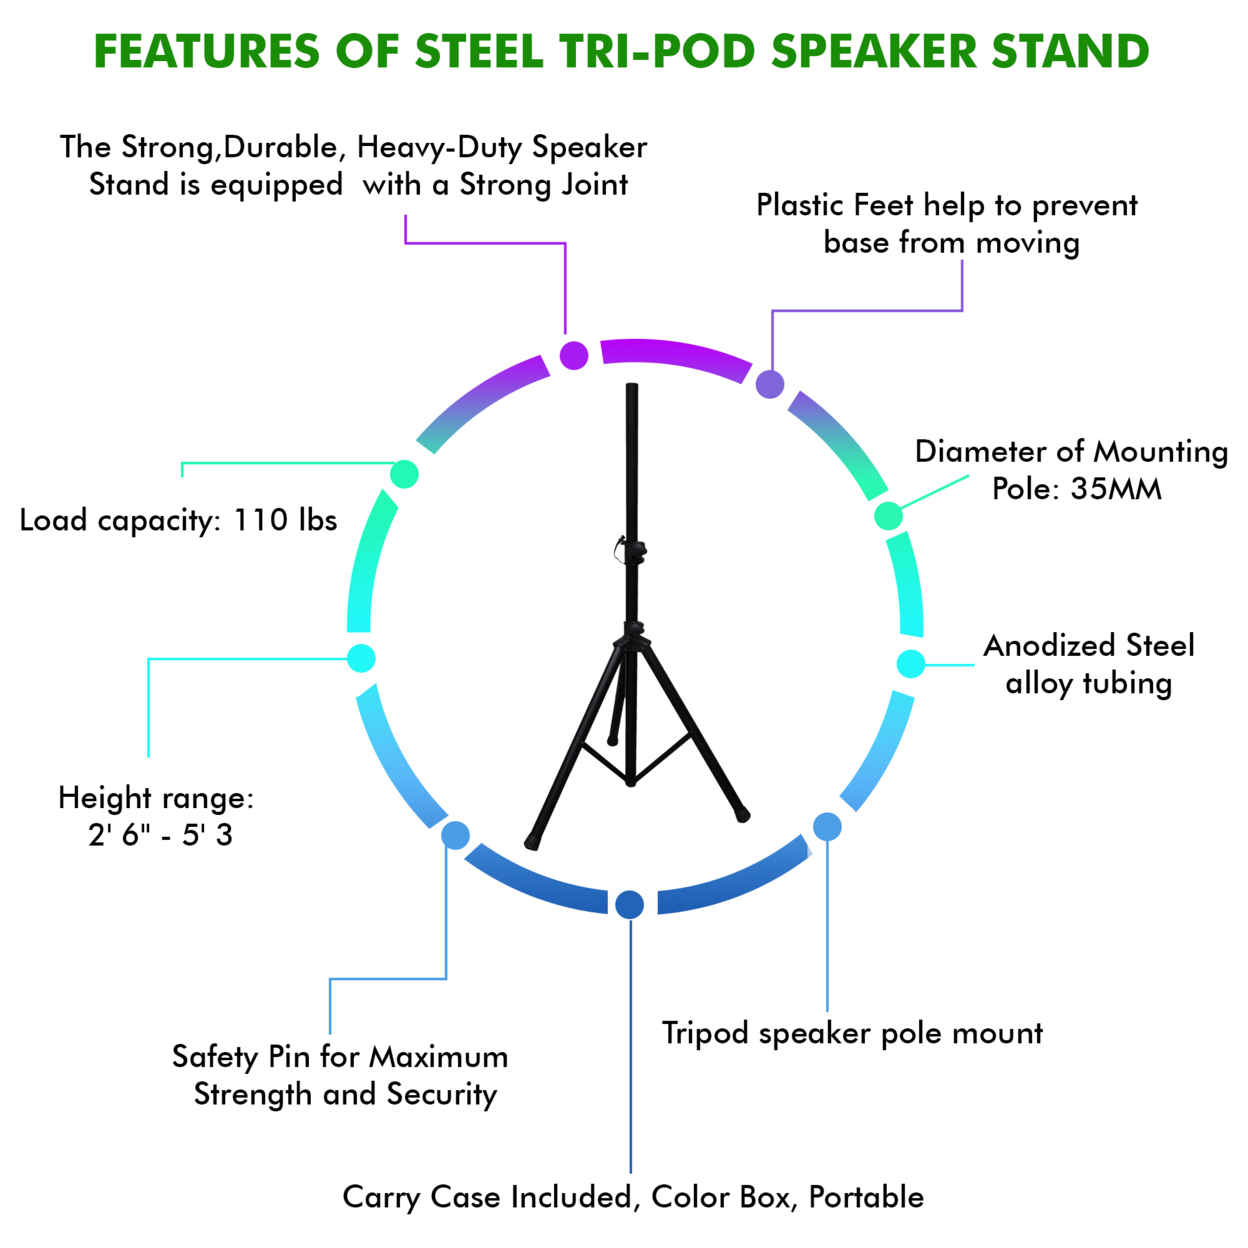 Technical Pro Professional Steel Tri-Pod Speaker Stand, Loudspeaker Mounting Stand - Perfect For Home, On-Stage Or In-Studio Use